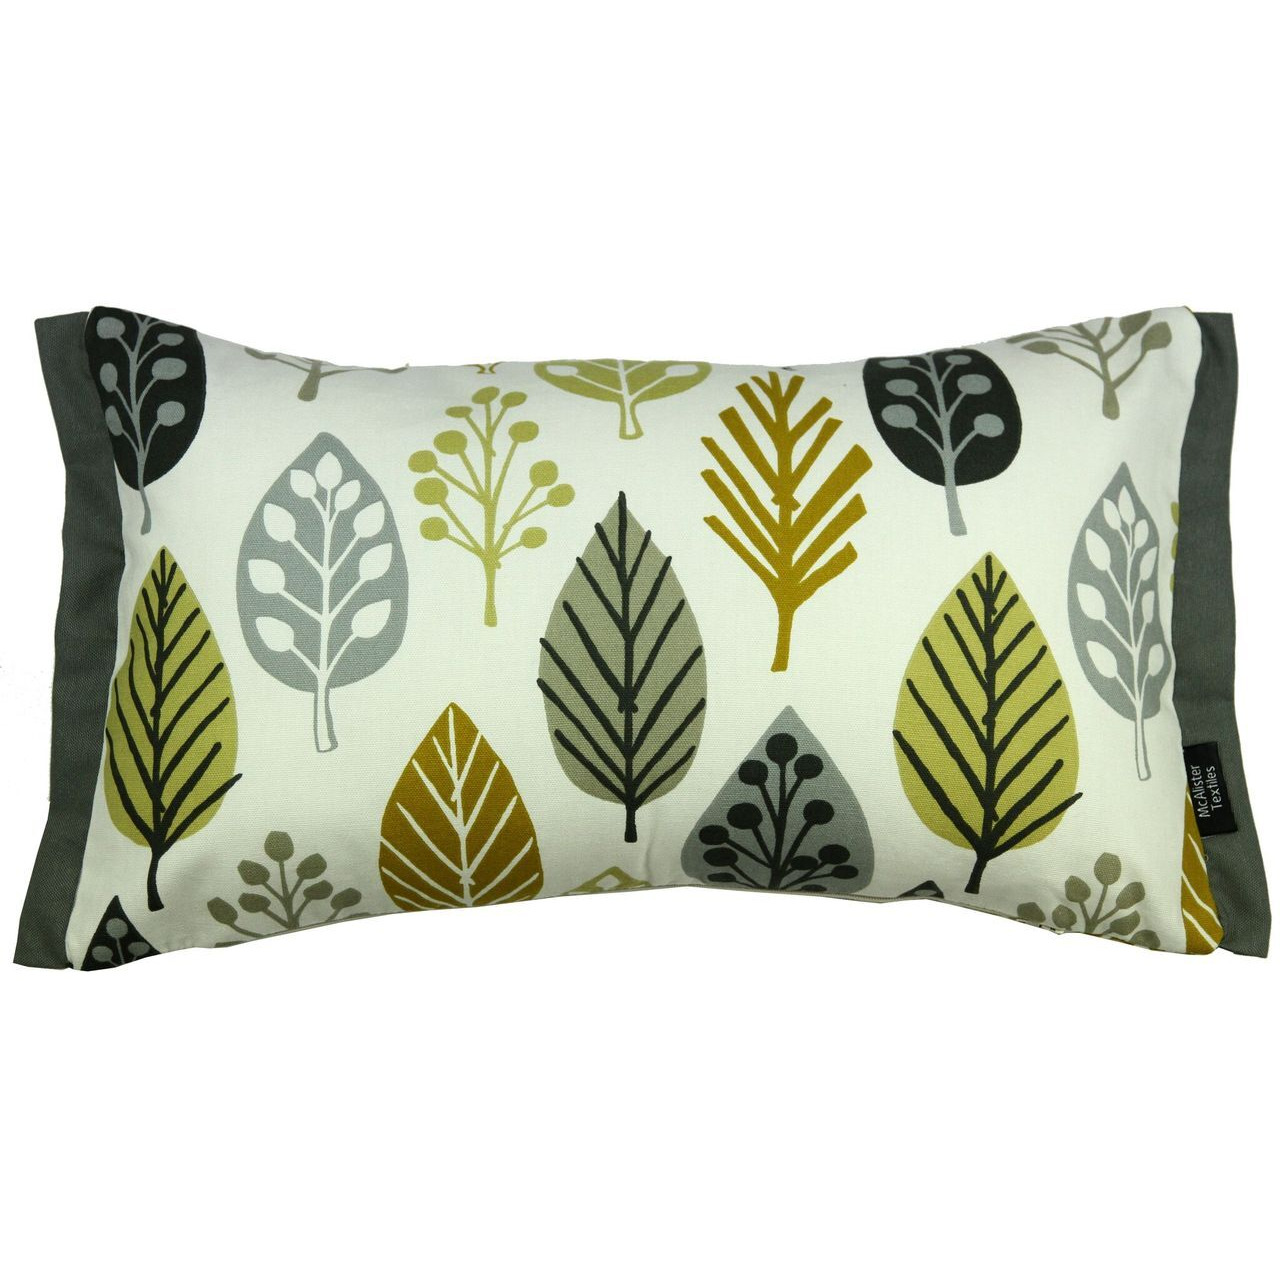 Magda Cotton Print Ochre Yellow Pillow, Cover Only / 50cm x 30cm